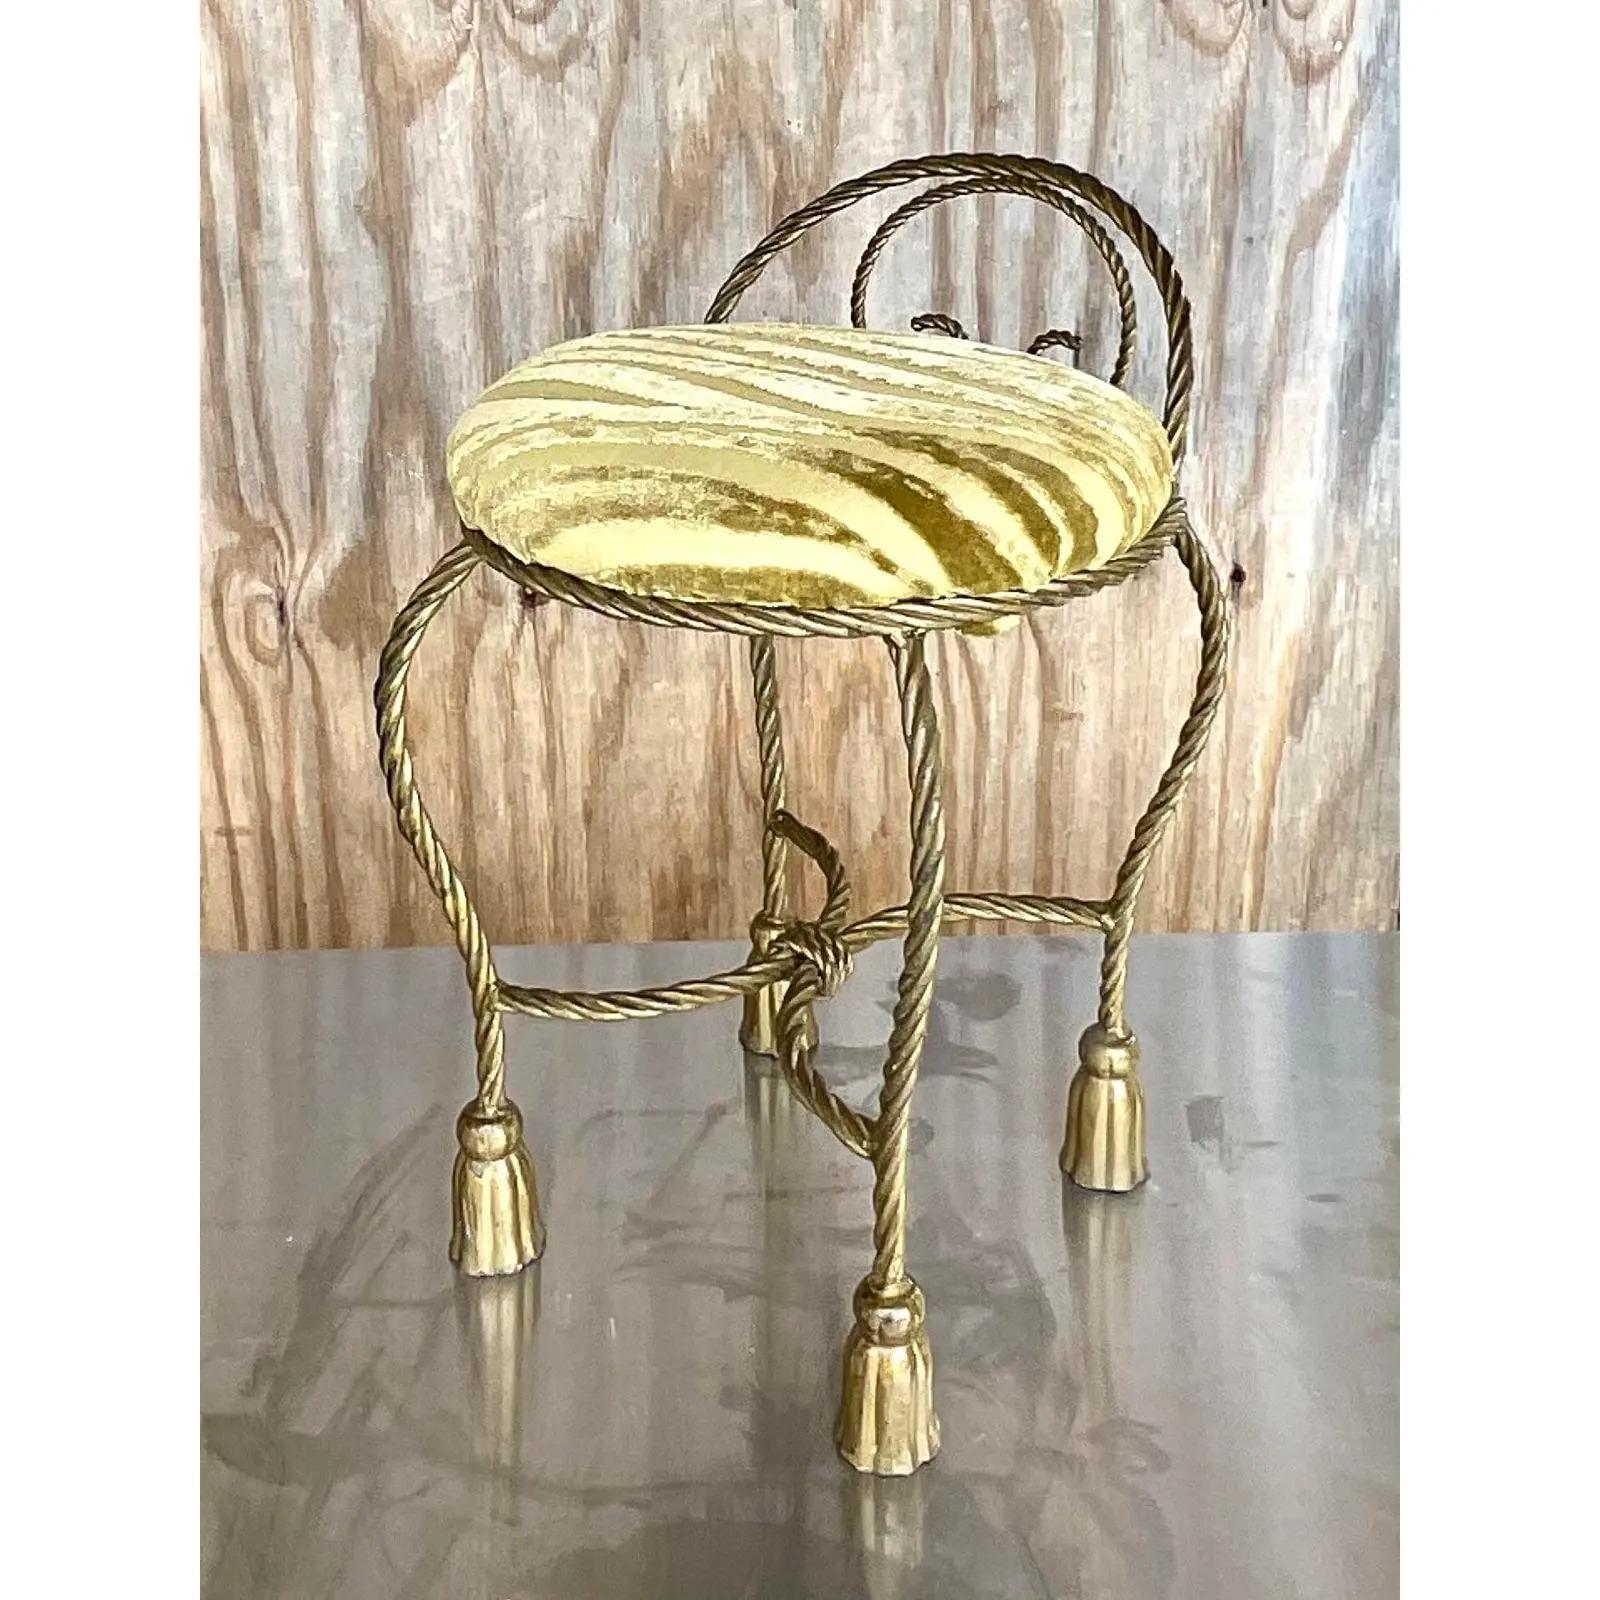 Fabulous vintage low vanity stool. The iconic rope and tassel design with a tiger Devore seat. A charming addition to any space. Acquired from a Palm Beach estate.